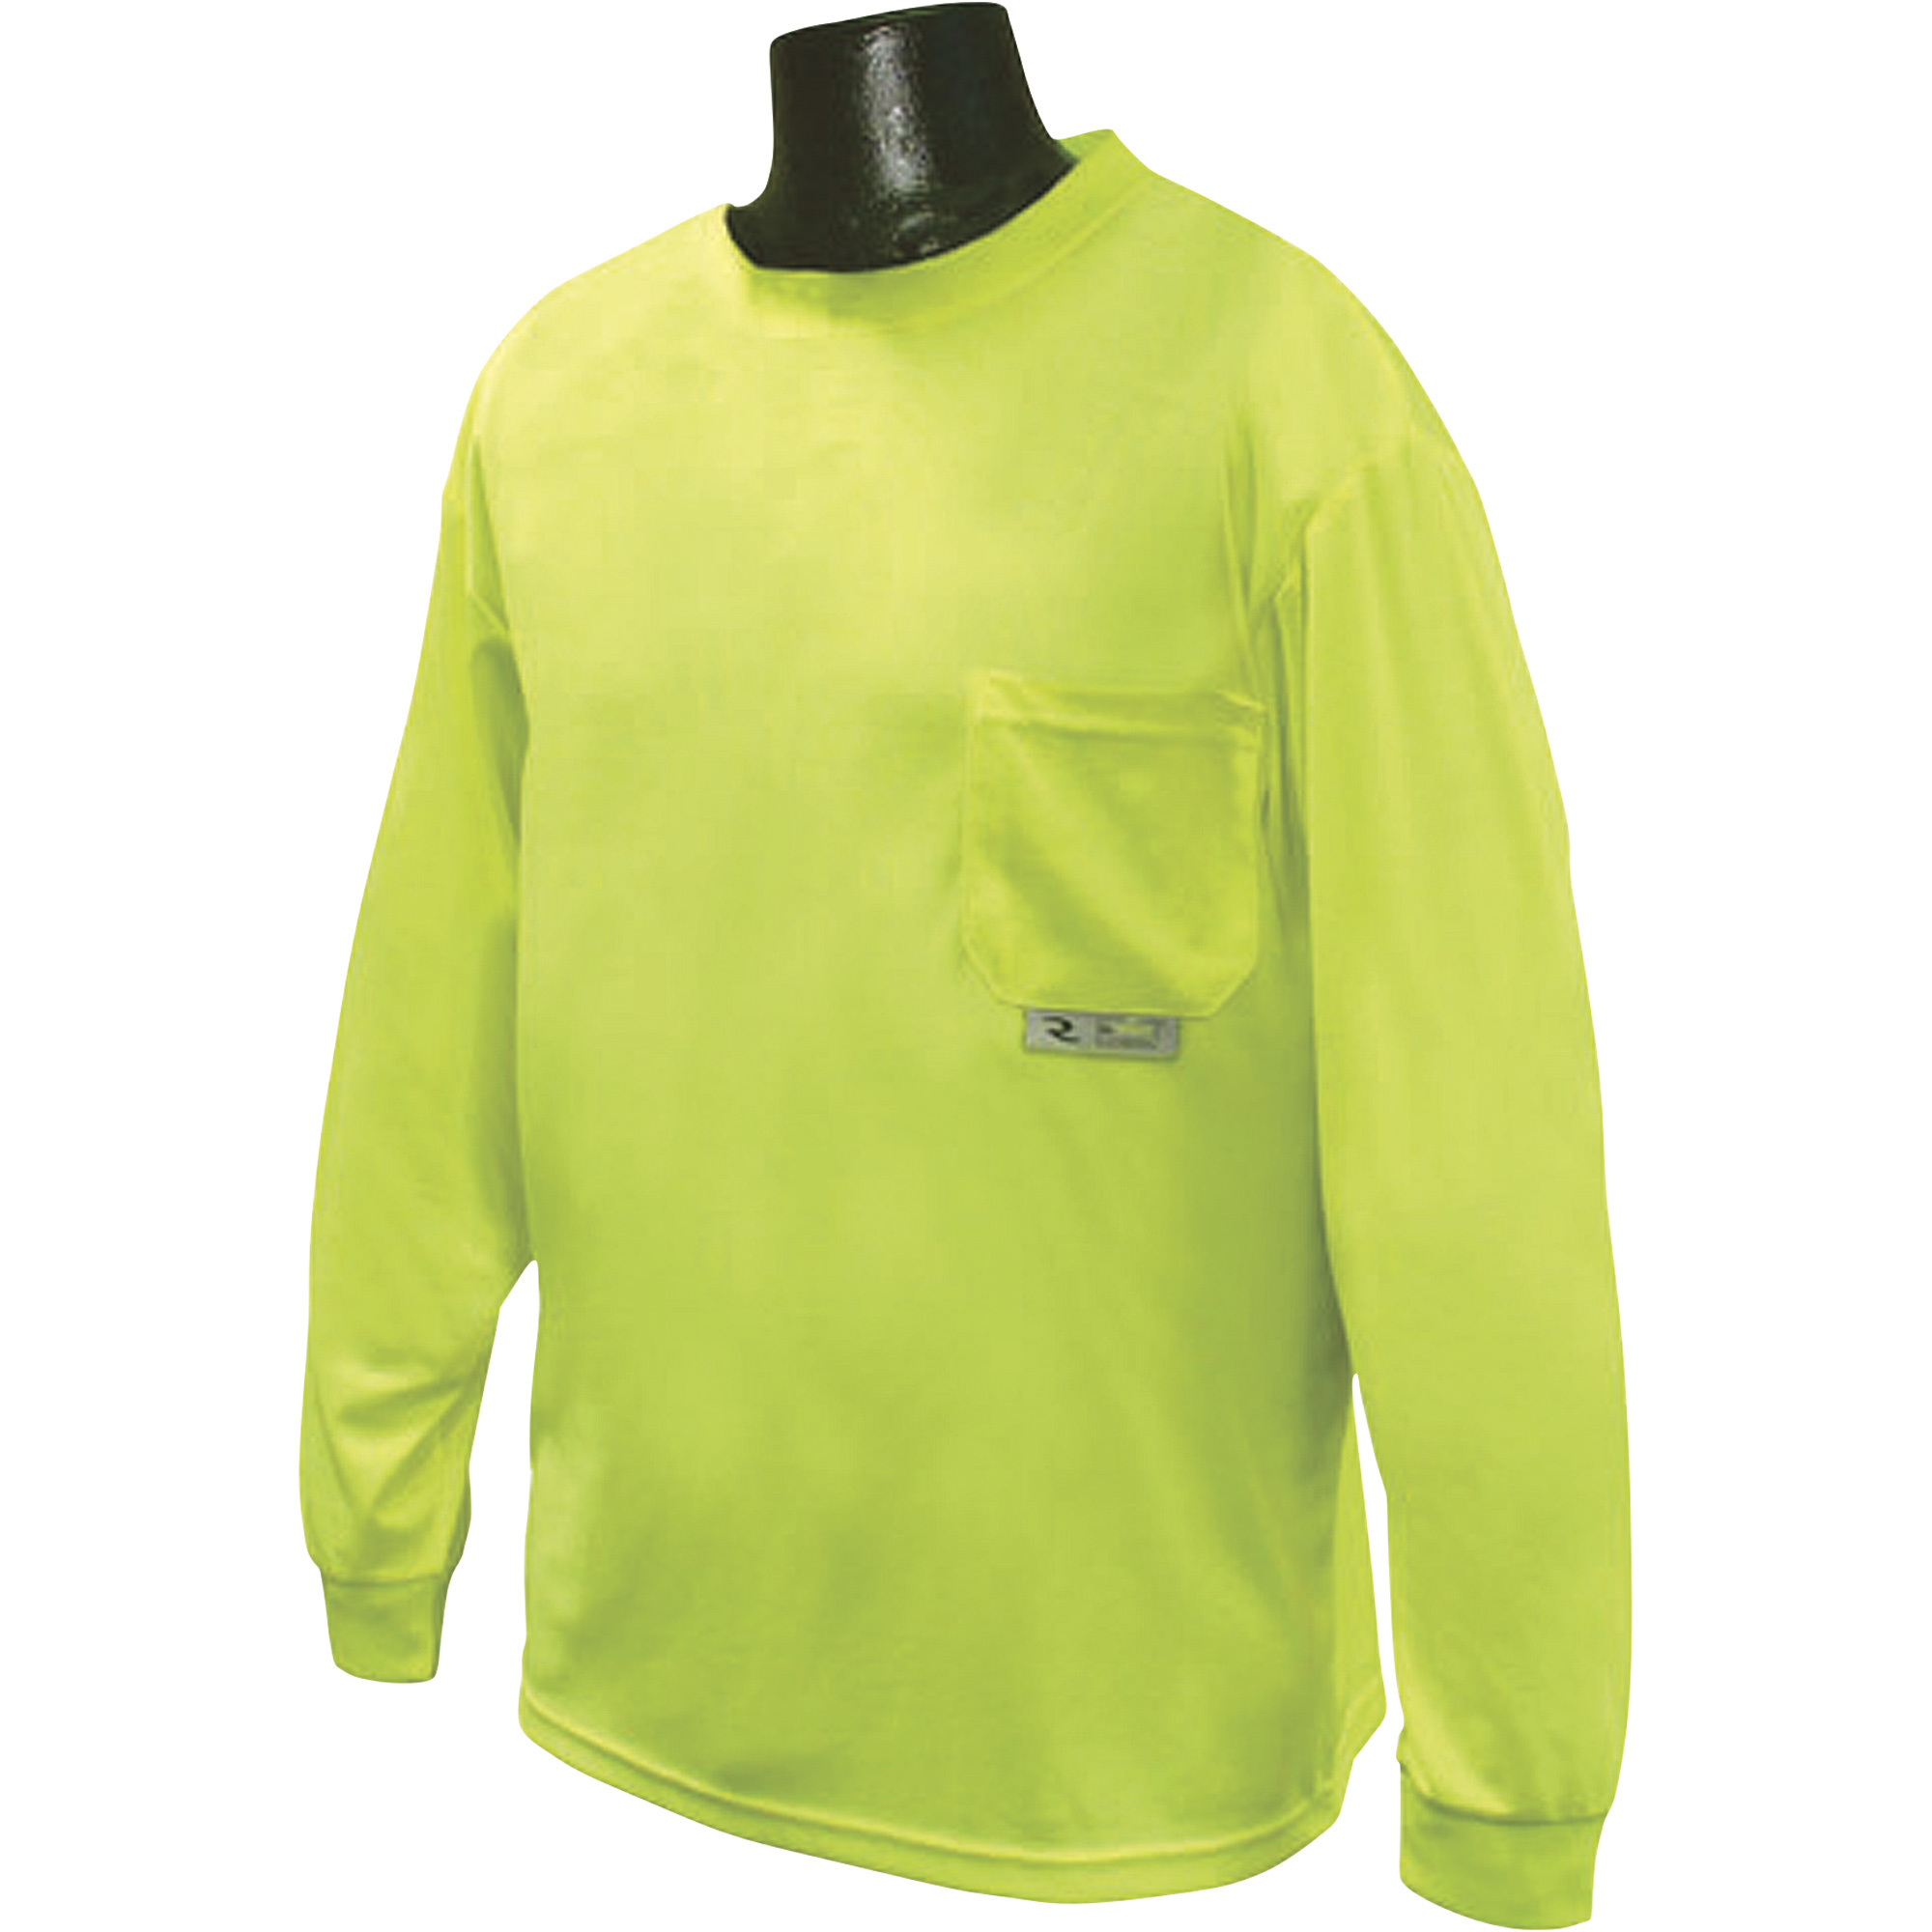 Radians RadWear Men's Non-Rated High Visibility Long Sleeve Safety T-Shirt with Max-Dri â Lime, Large, Model ST21-NPGS